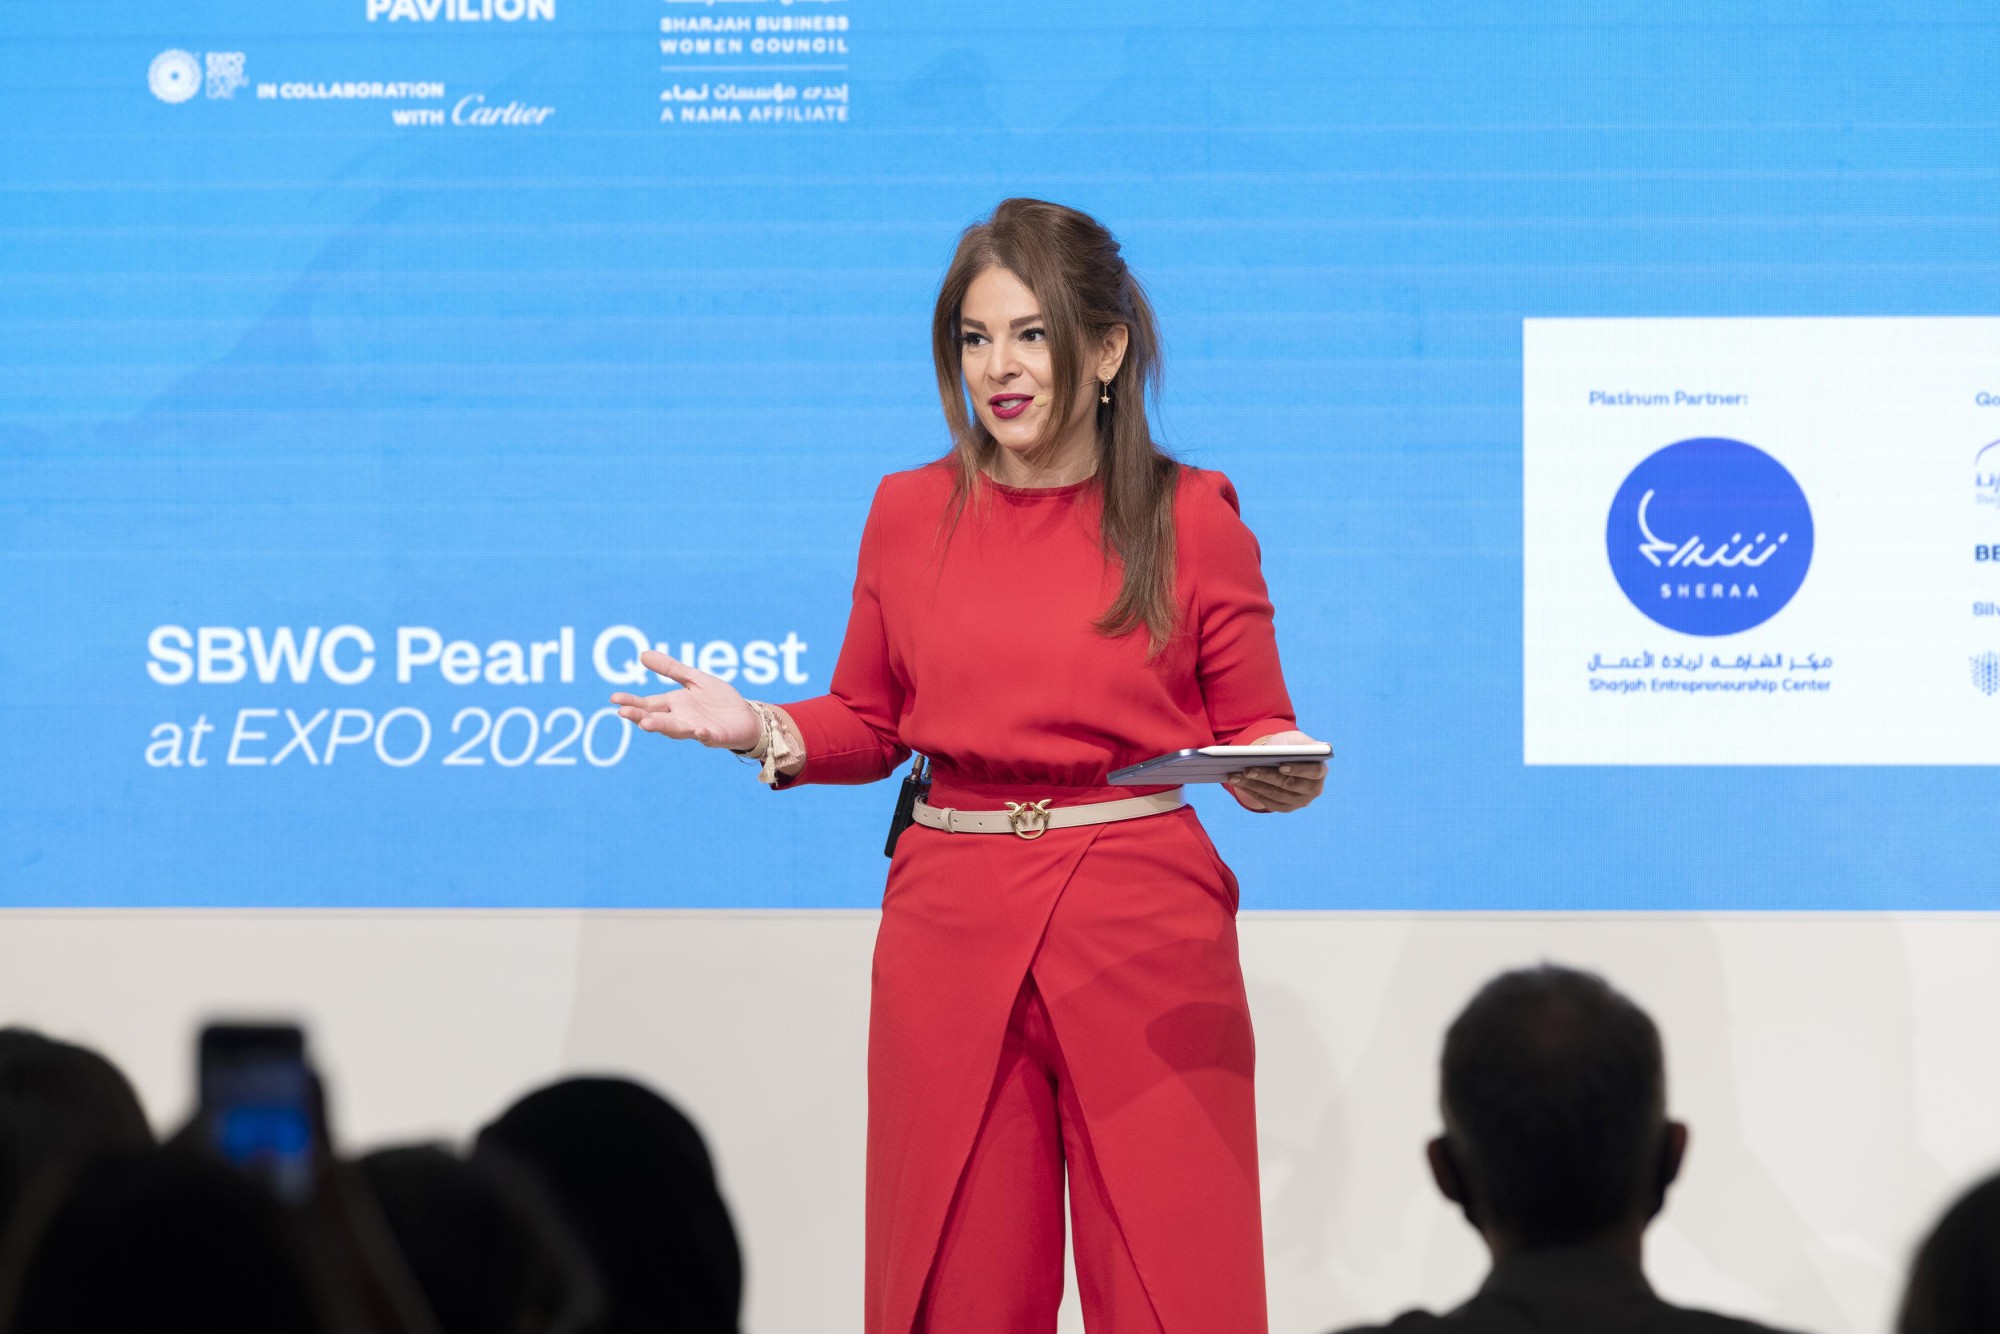 Jessy El Murr, Senior Journalist and host speaks during the Outlier Series - Pearl Quest by Sharjah Business Women Council at the Women’s Pavilion m45242